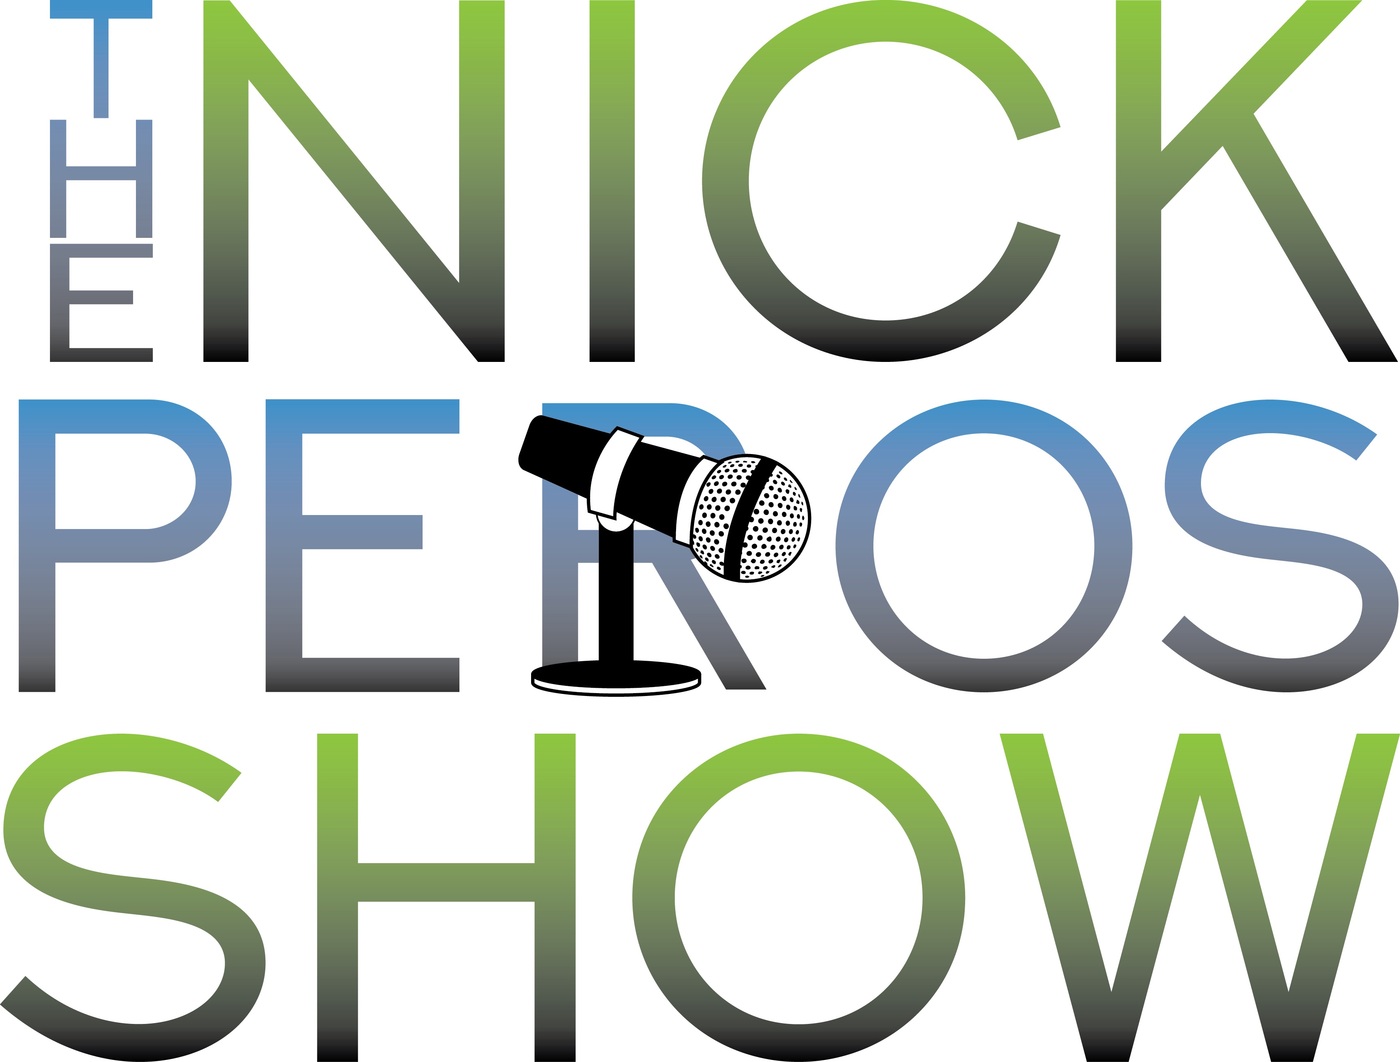 The Nick Peros Show - Episode 14 - We're Back!